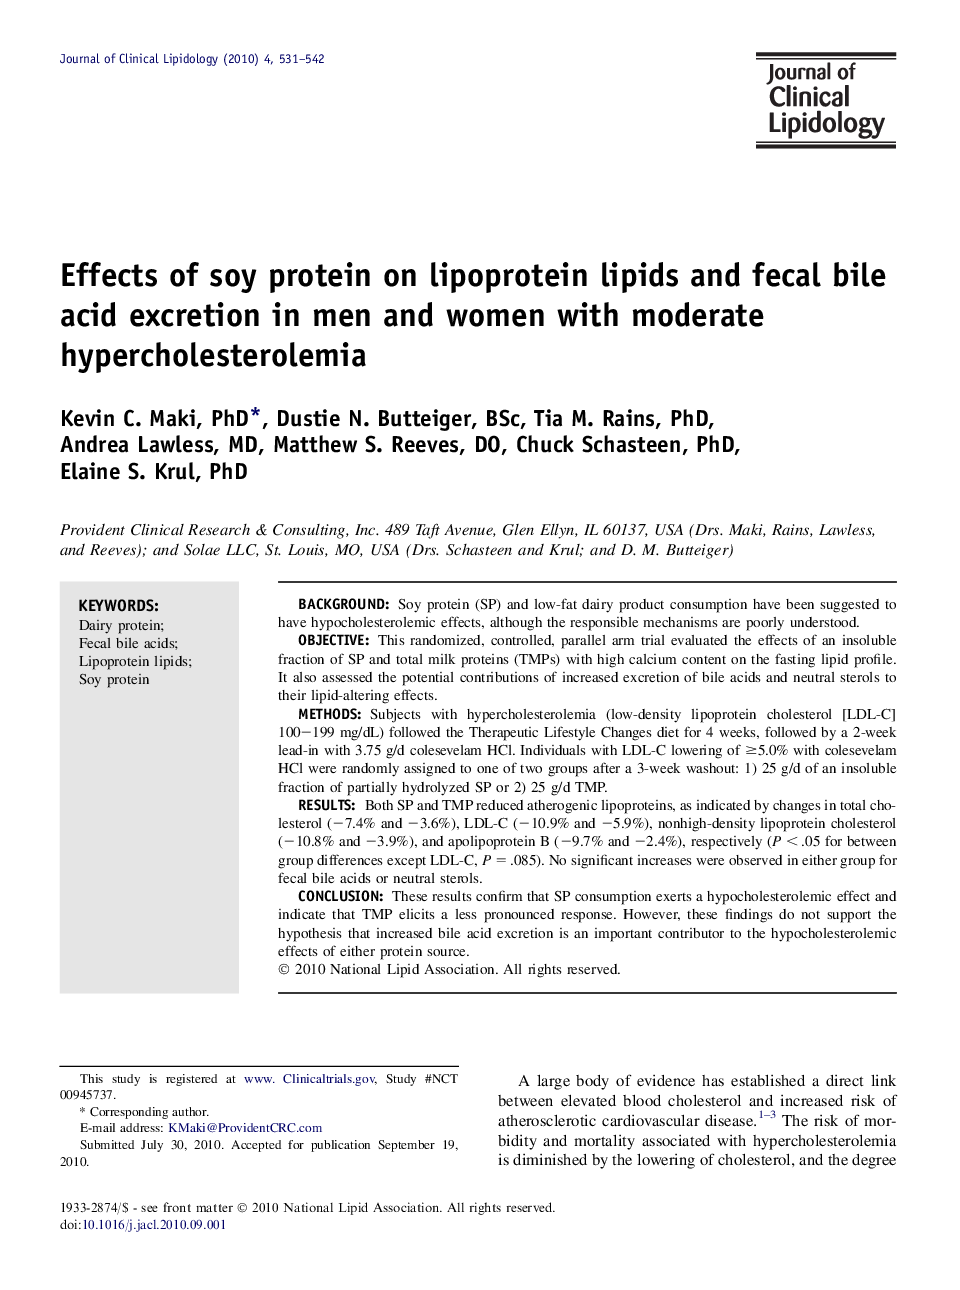 Effects of soy protein on lipoprotein lipids and fecal bile acid excretion in men and women with moderate hypercholesterolemia 